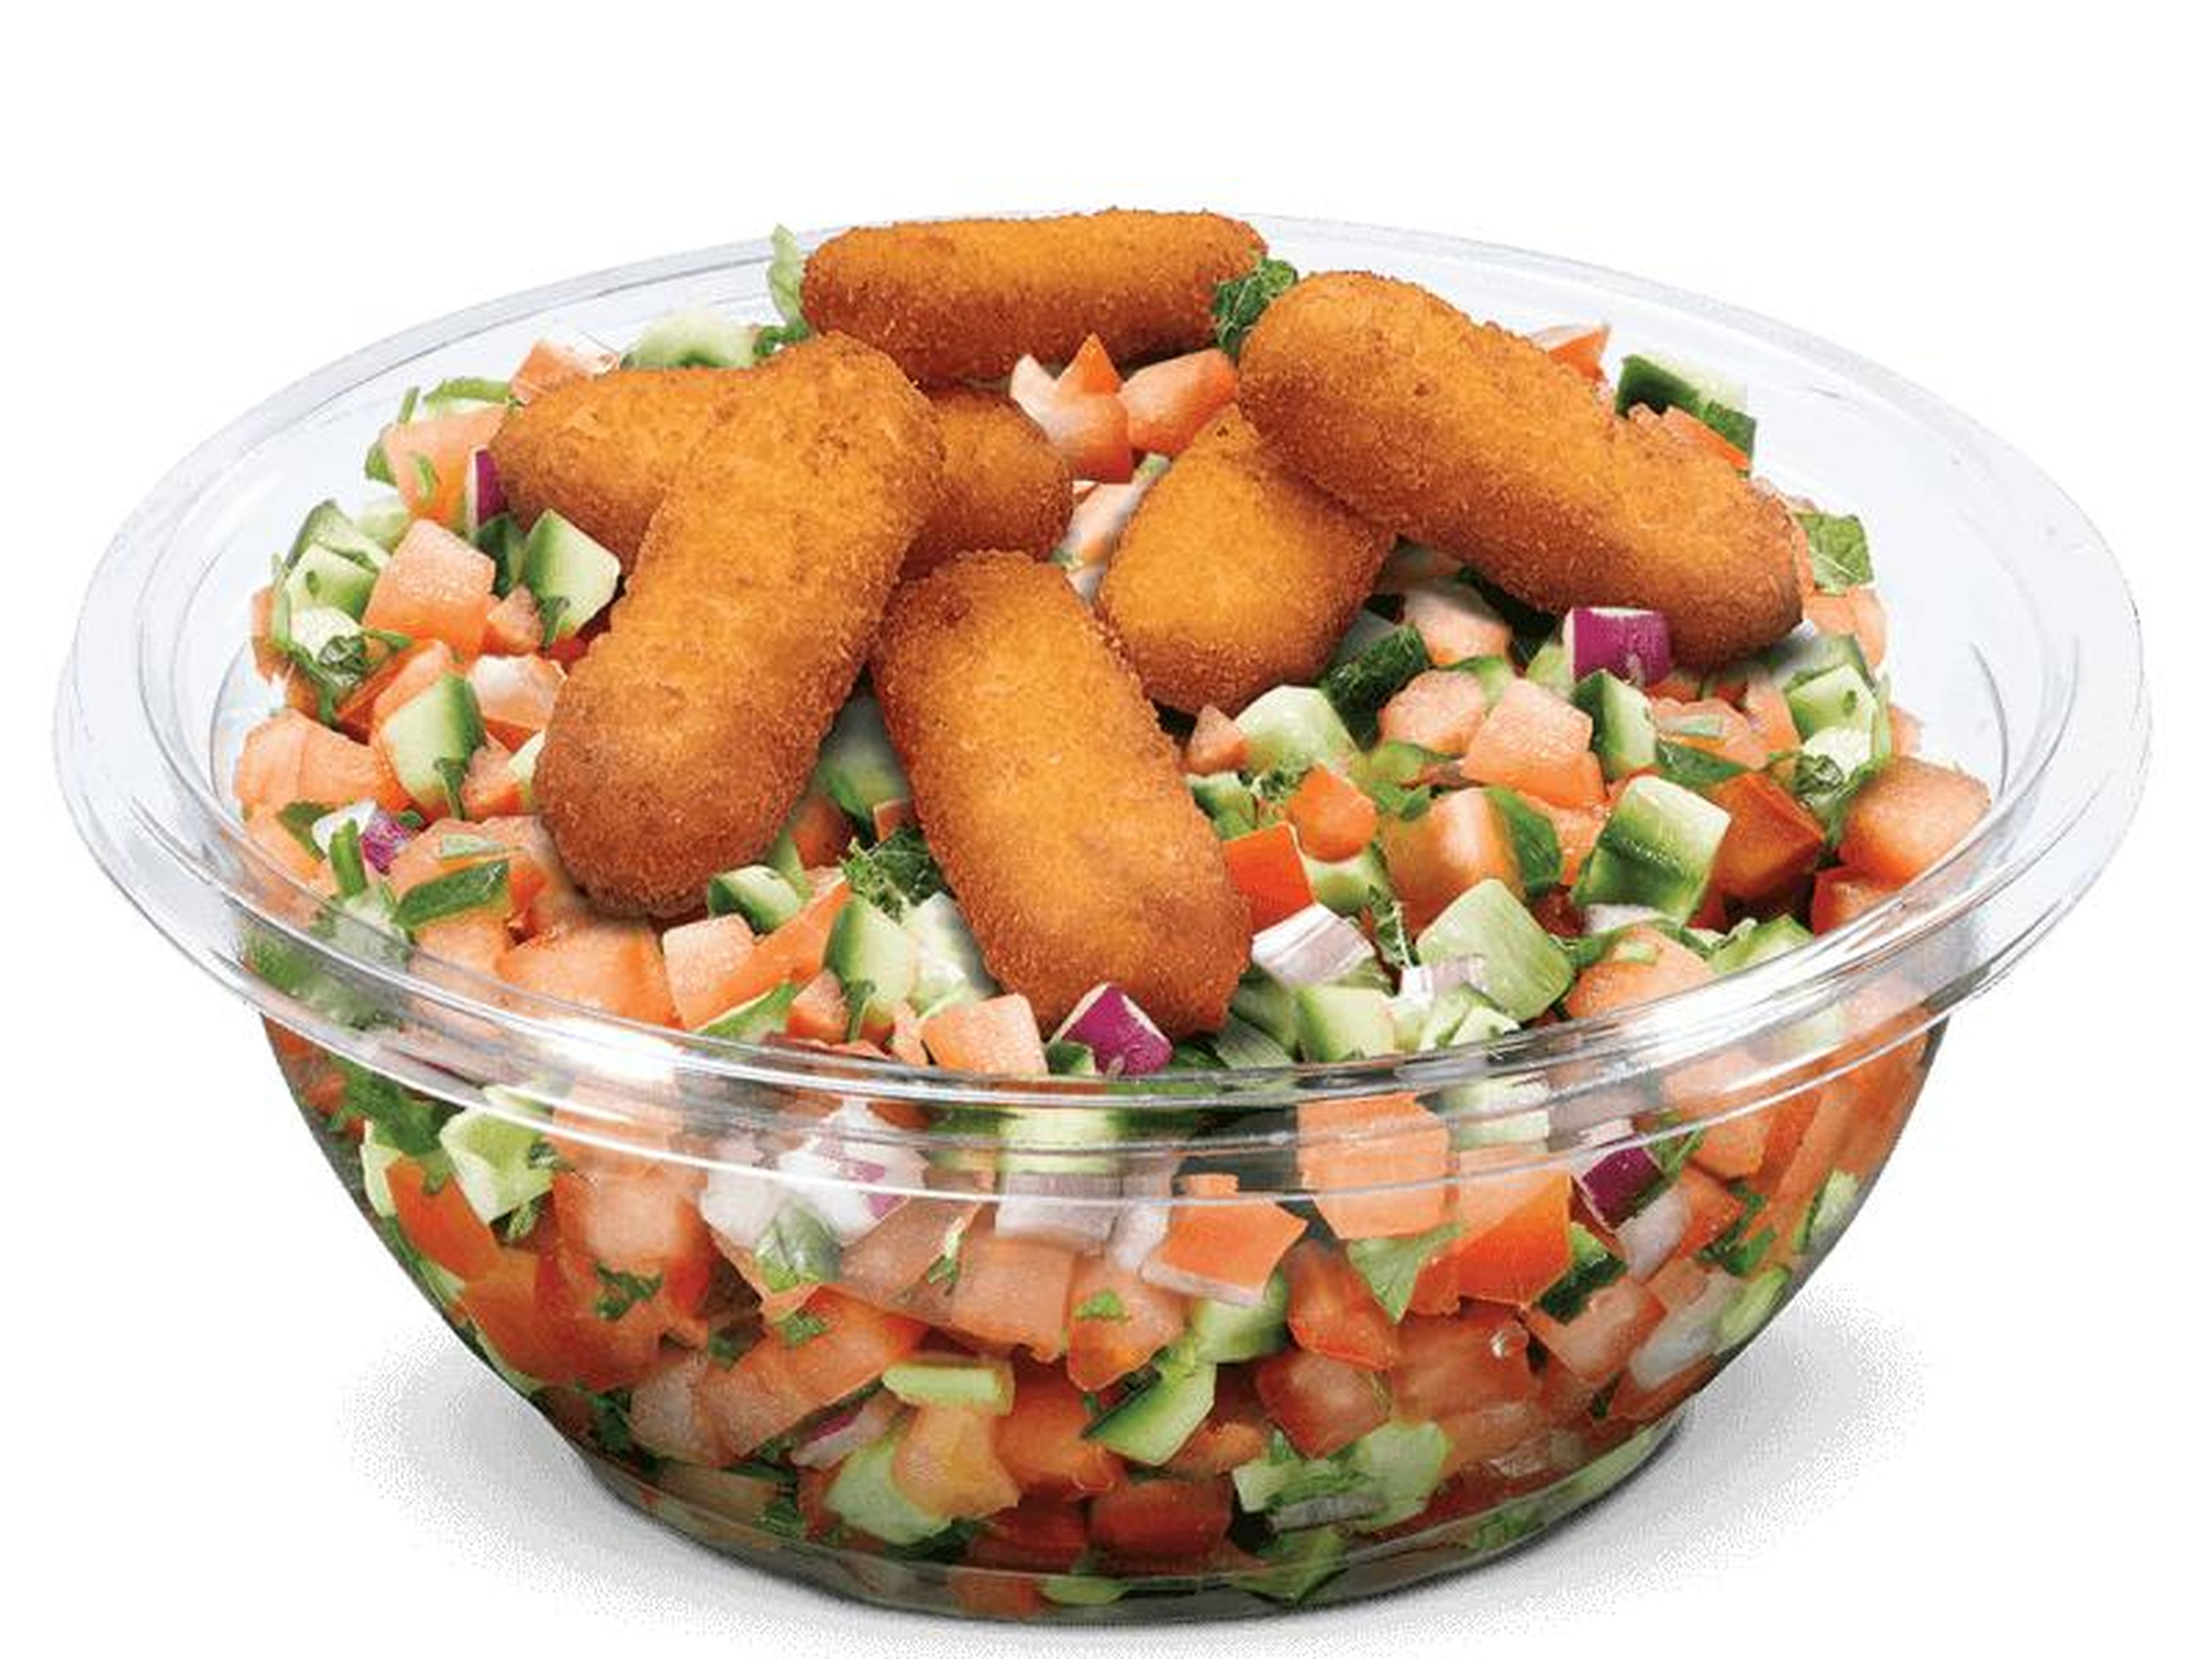 For one of the 15 salad options on McDonald's Israel's menu, fresh chopped vegetables are topped with olive oil, lemon, and fried corn sticks.